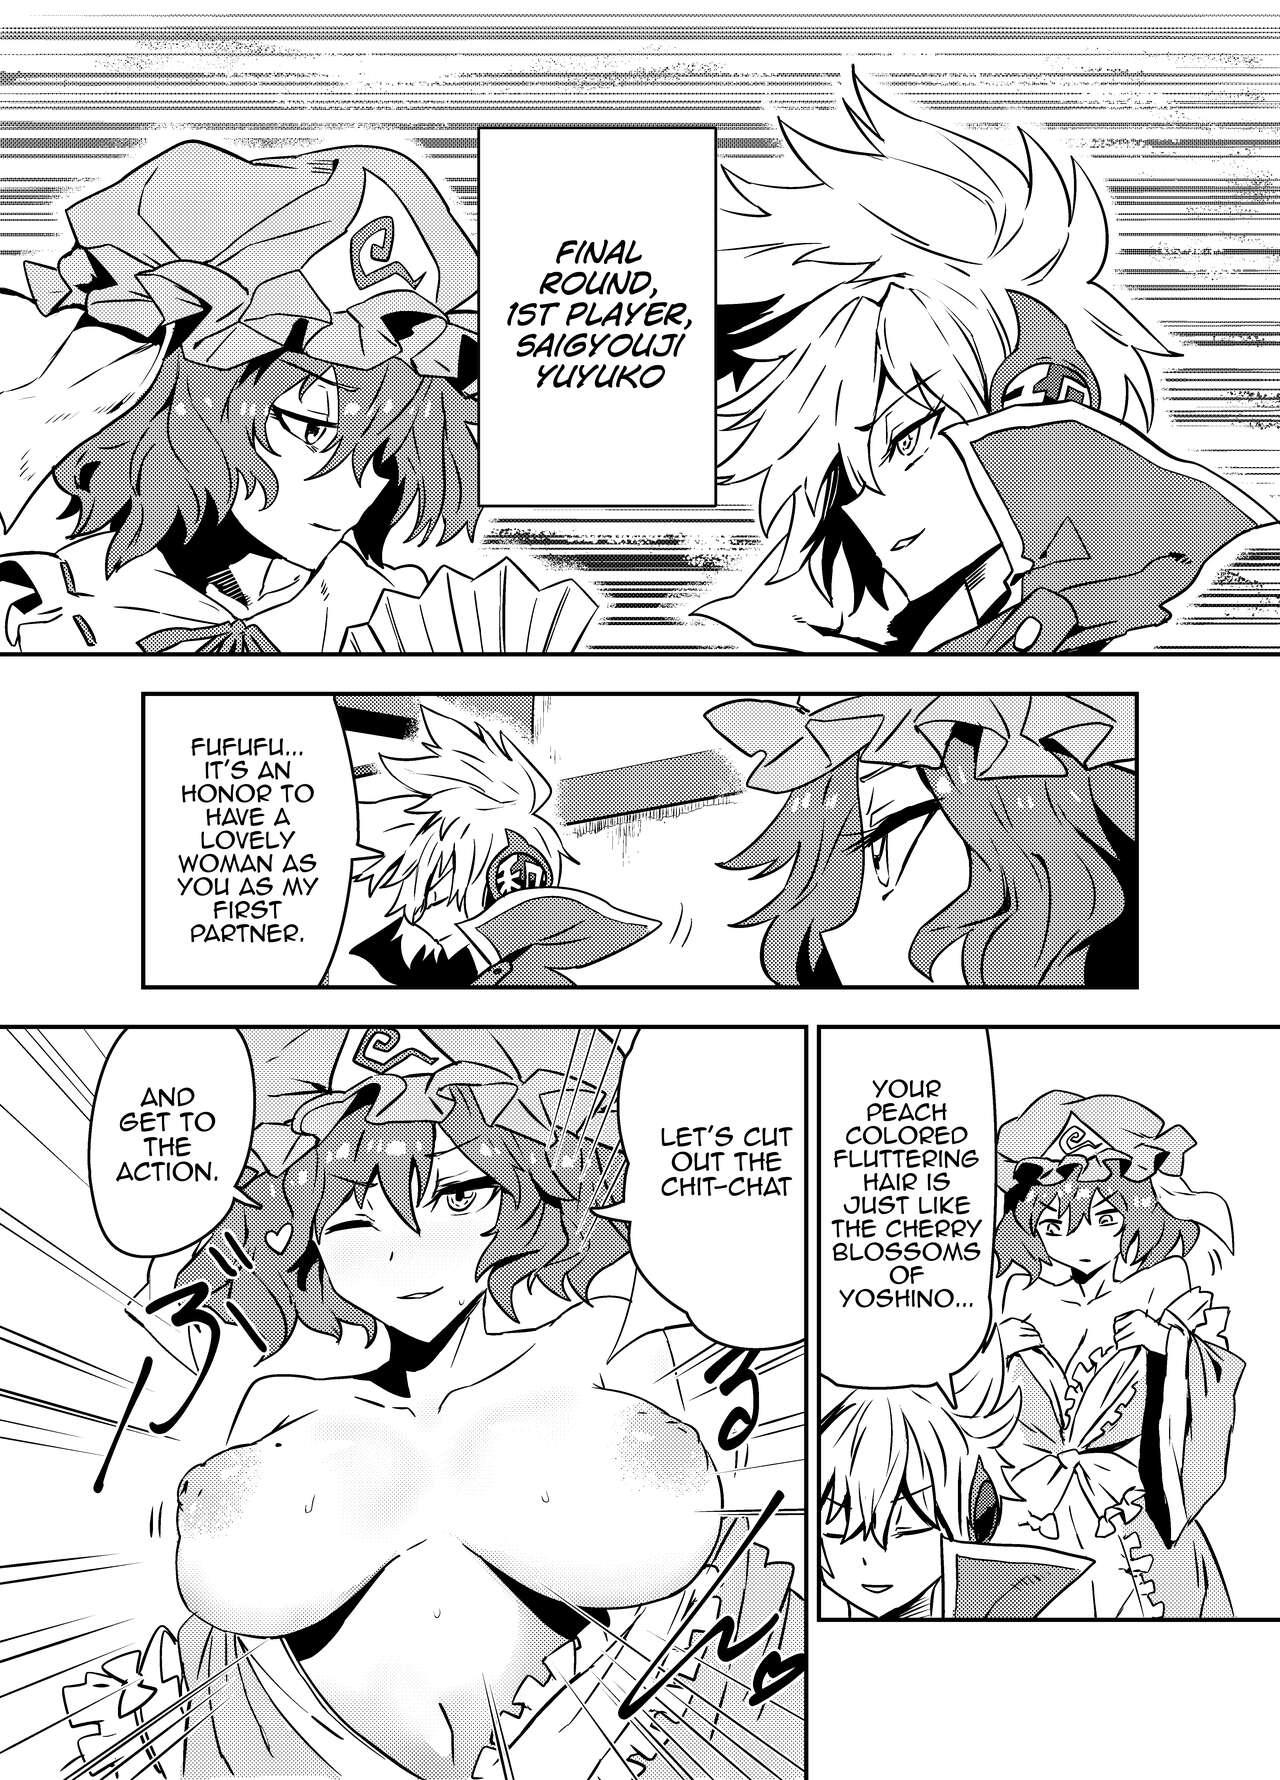 Russian Princess Fight - Touhou project Exhibition - Page 9